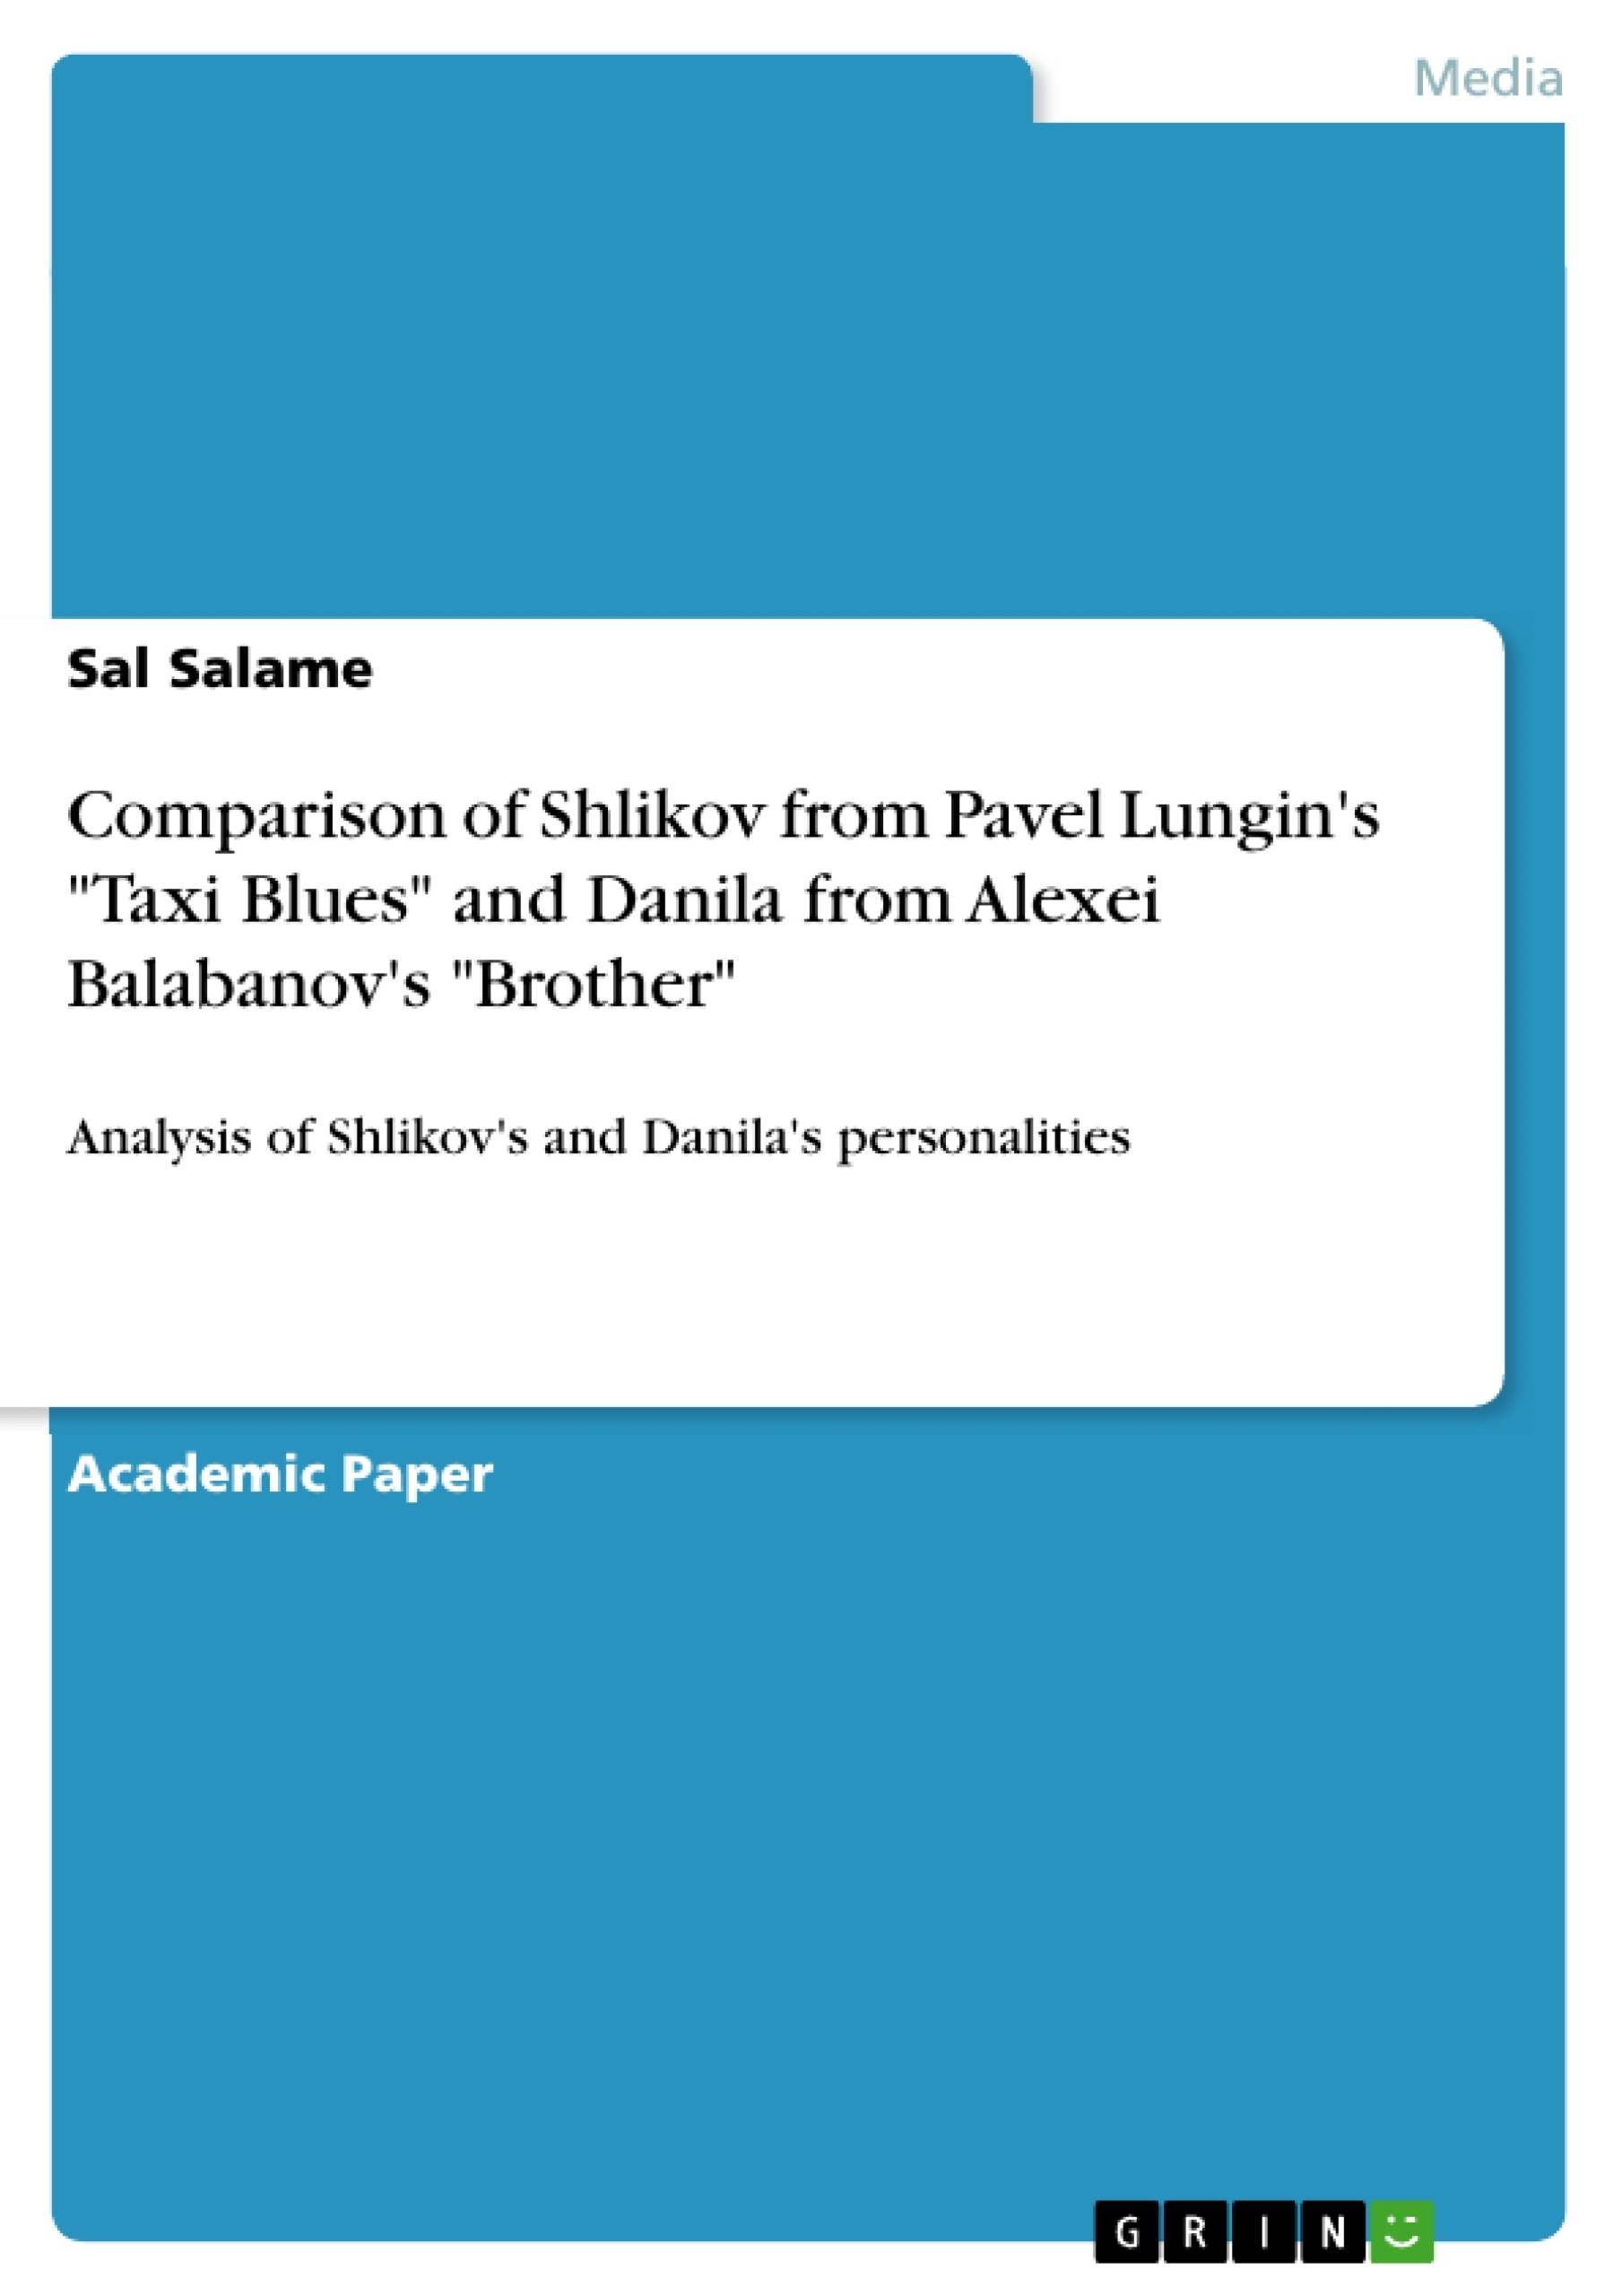 Titre: Comparison of Shlikov from Pavel Lungin's "Taxi Blues" and Danila from Alexei Balabanov's "Brother"